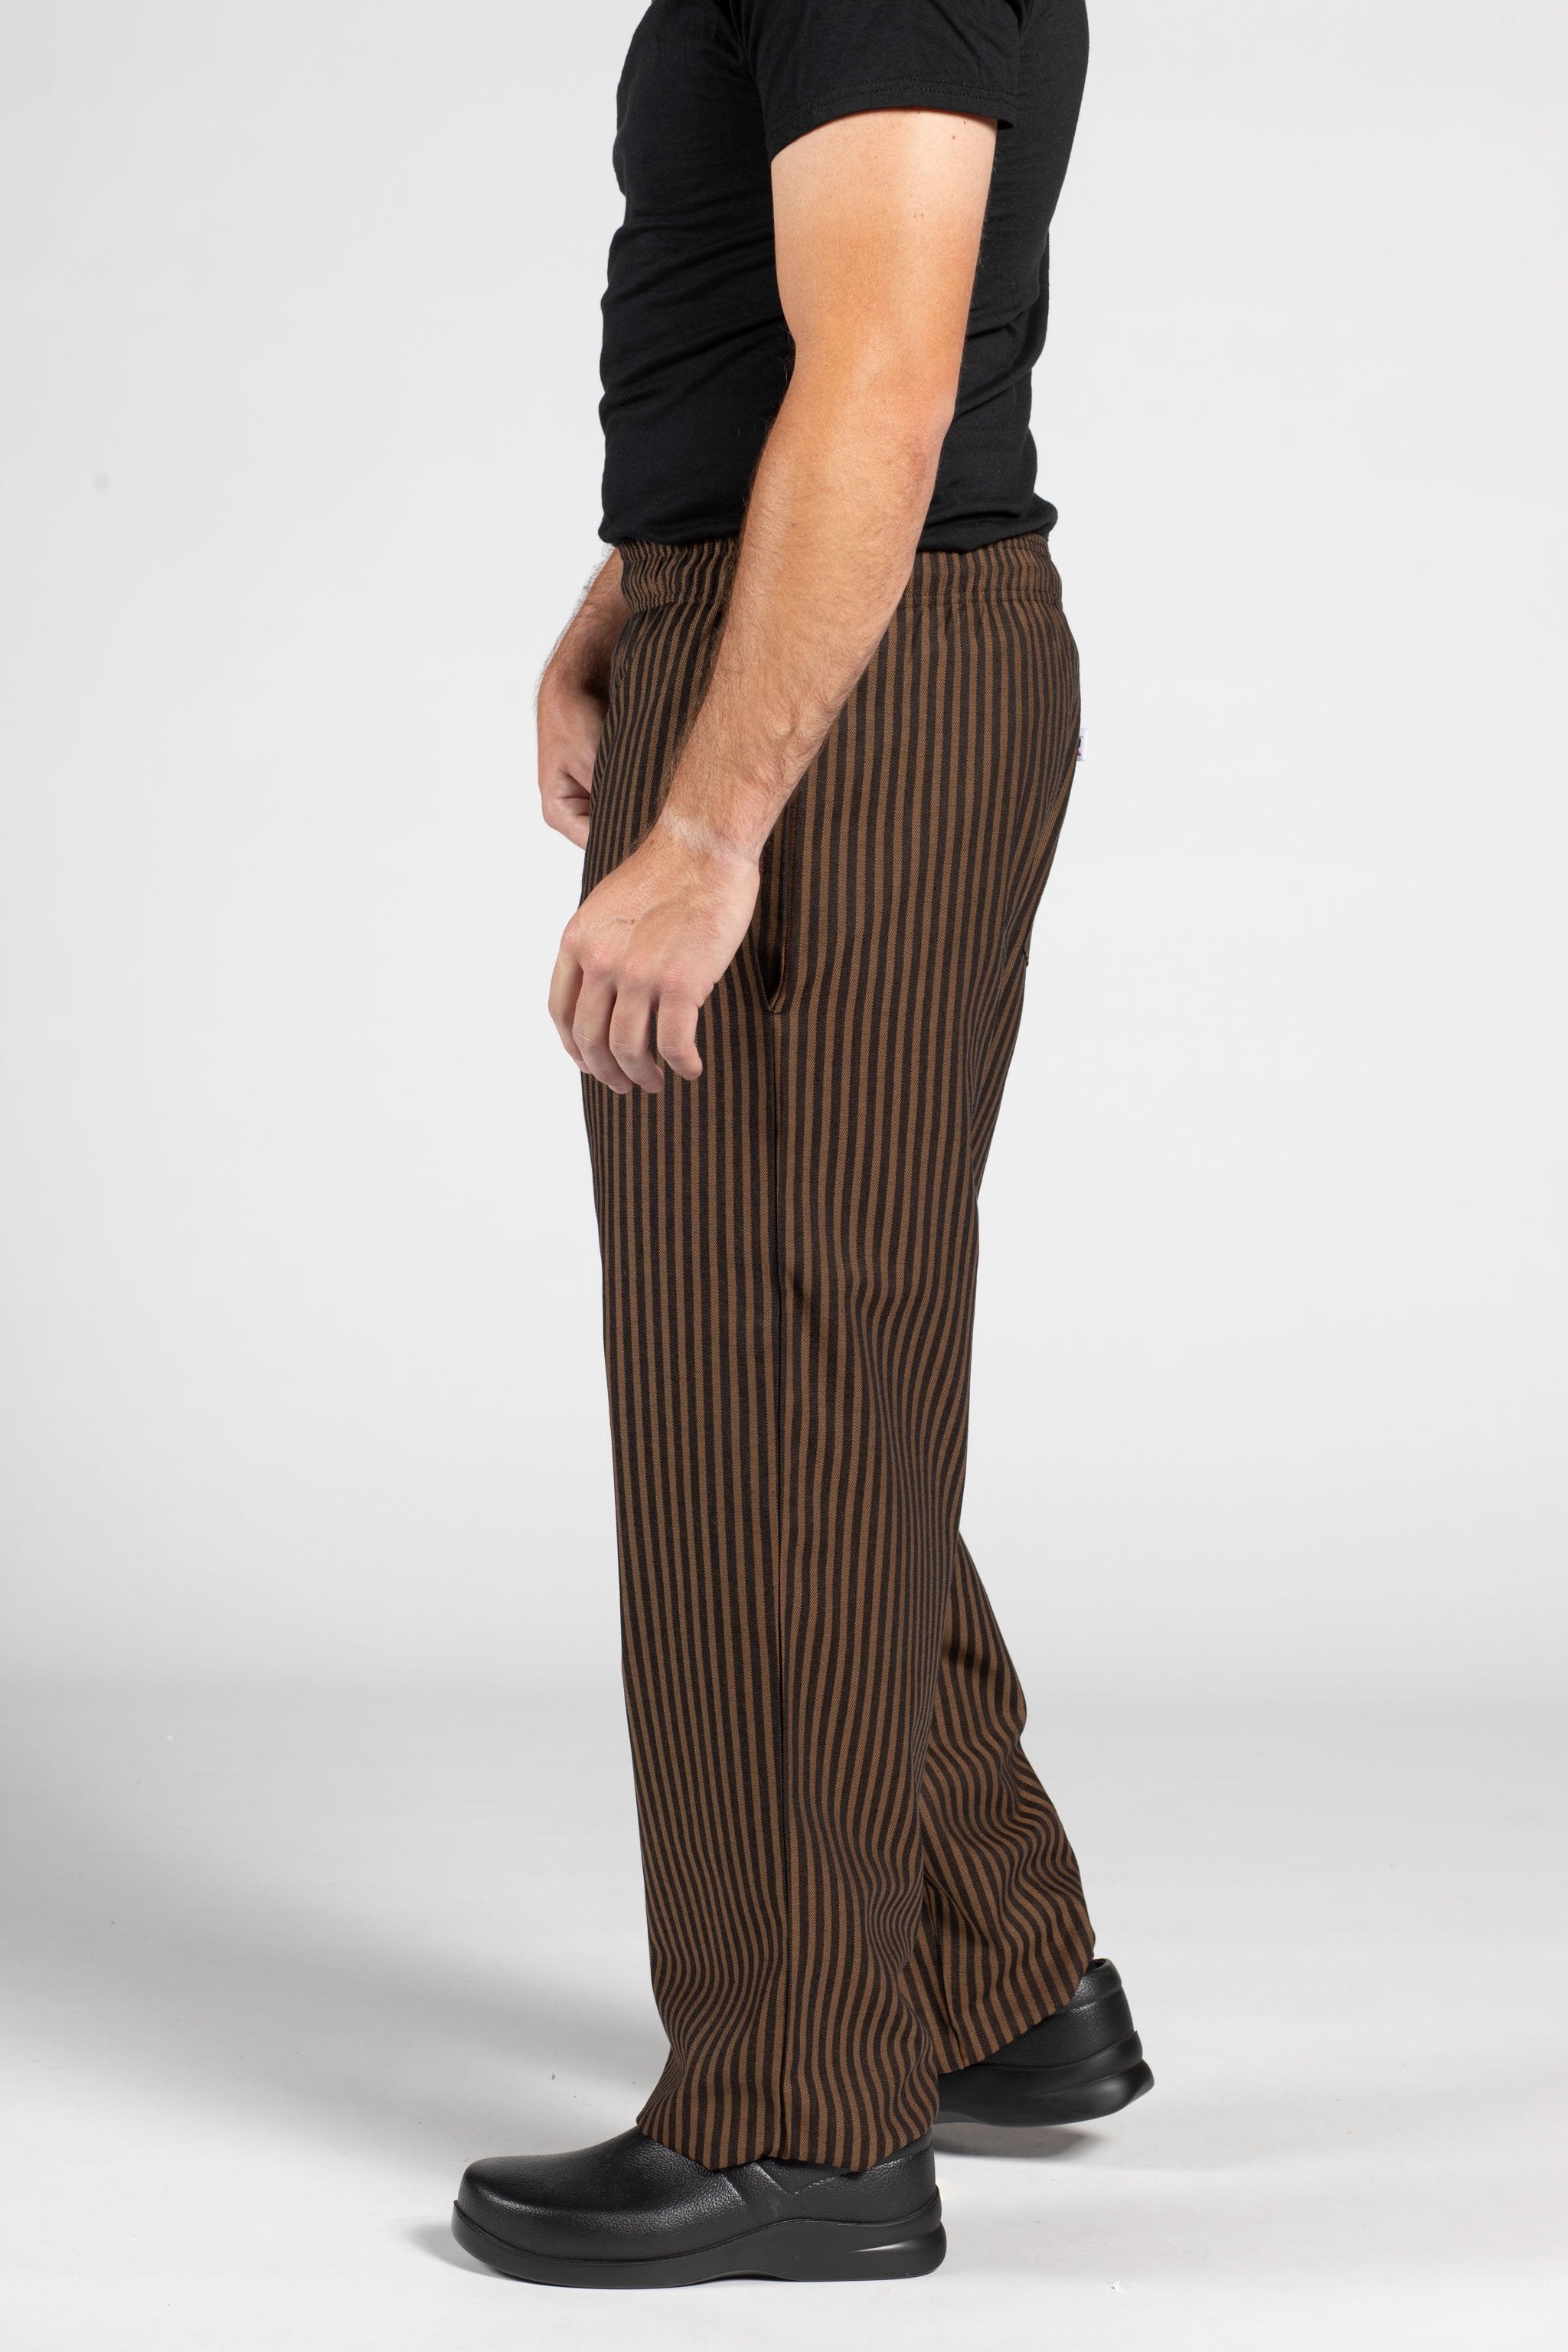 Beige Vertical Striped Pants Outfits For Men (38 ideas & outfits) |  Lookastic